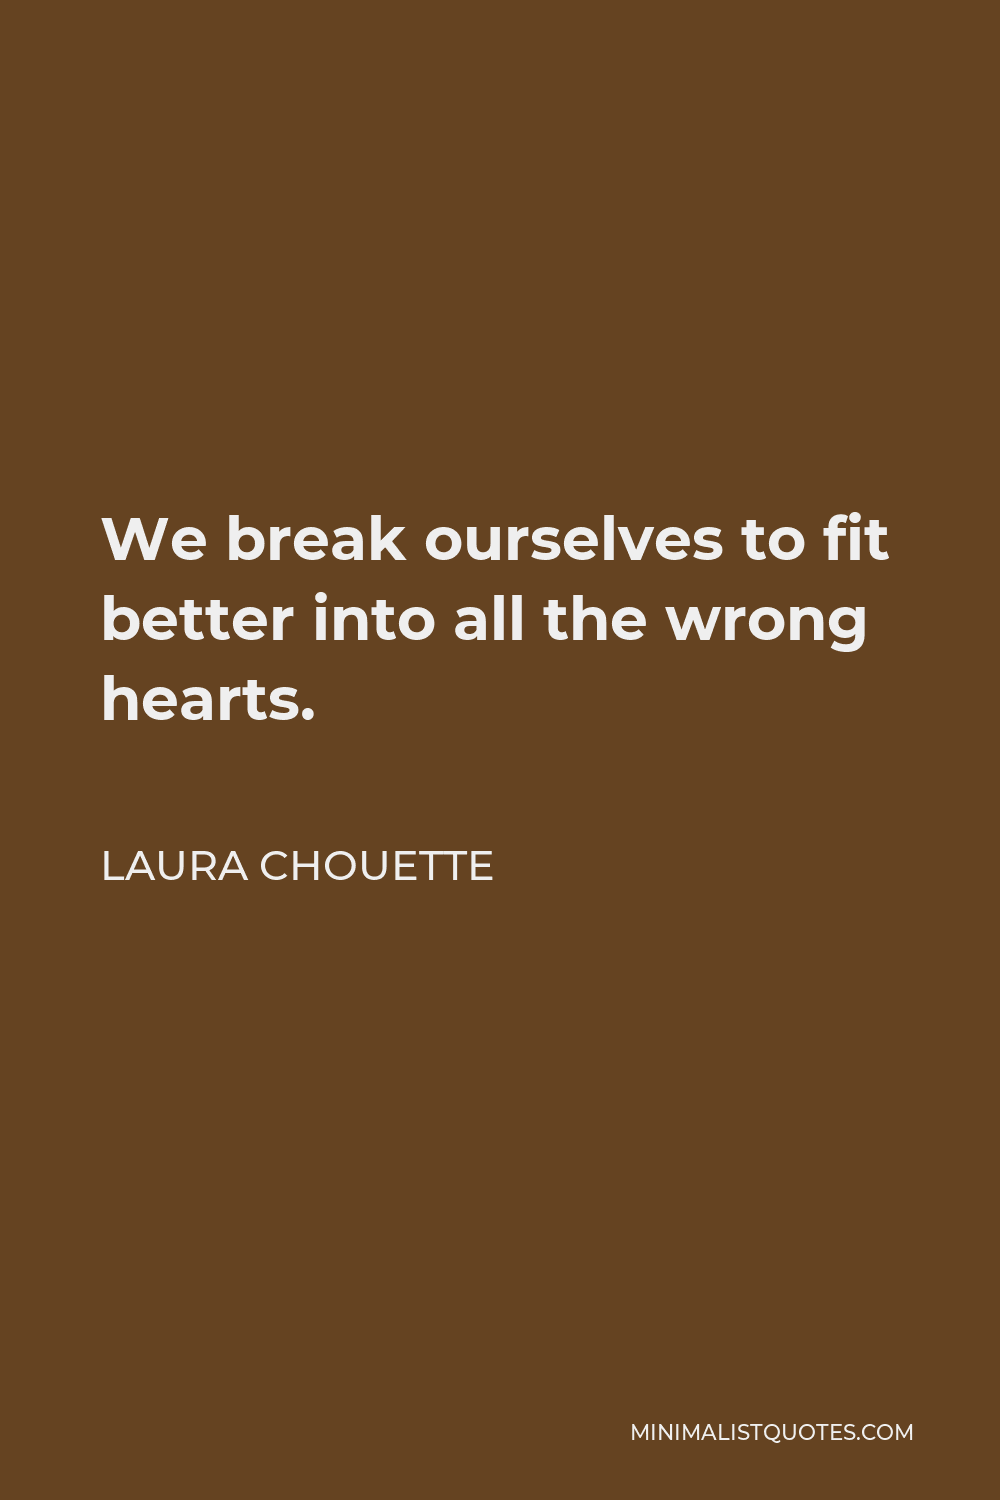 Laura Chouette Quote - We break ourselves to fit better into all the wrong hearts.